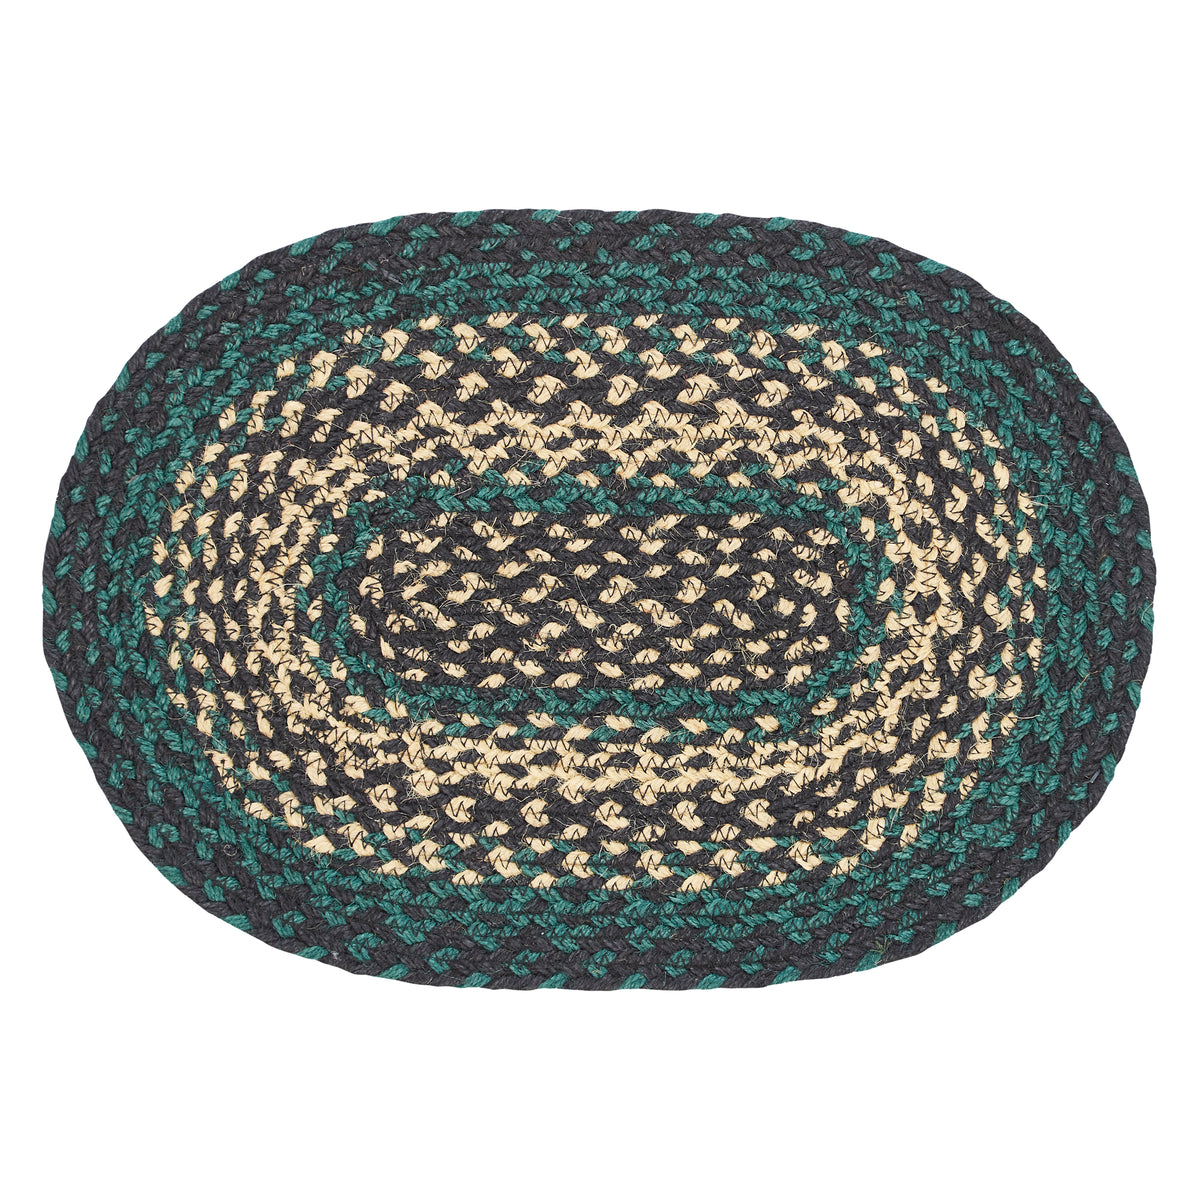 Pine Grove Jute Oval Placemat 10x15